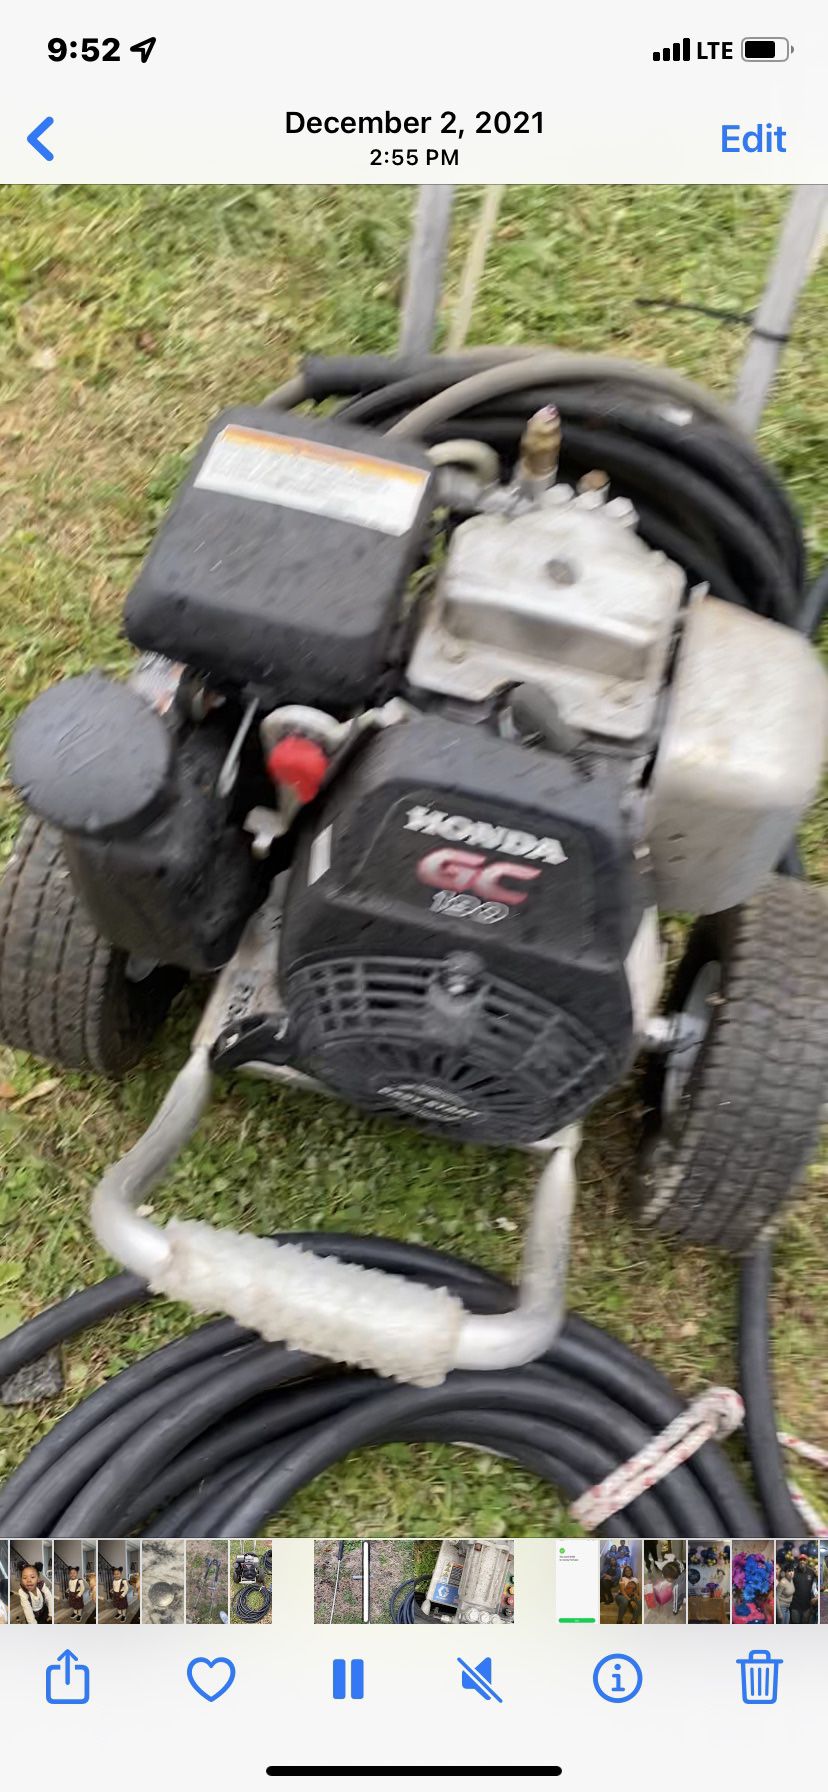 Power washer in great condition 2500